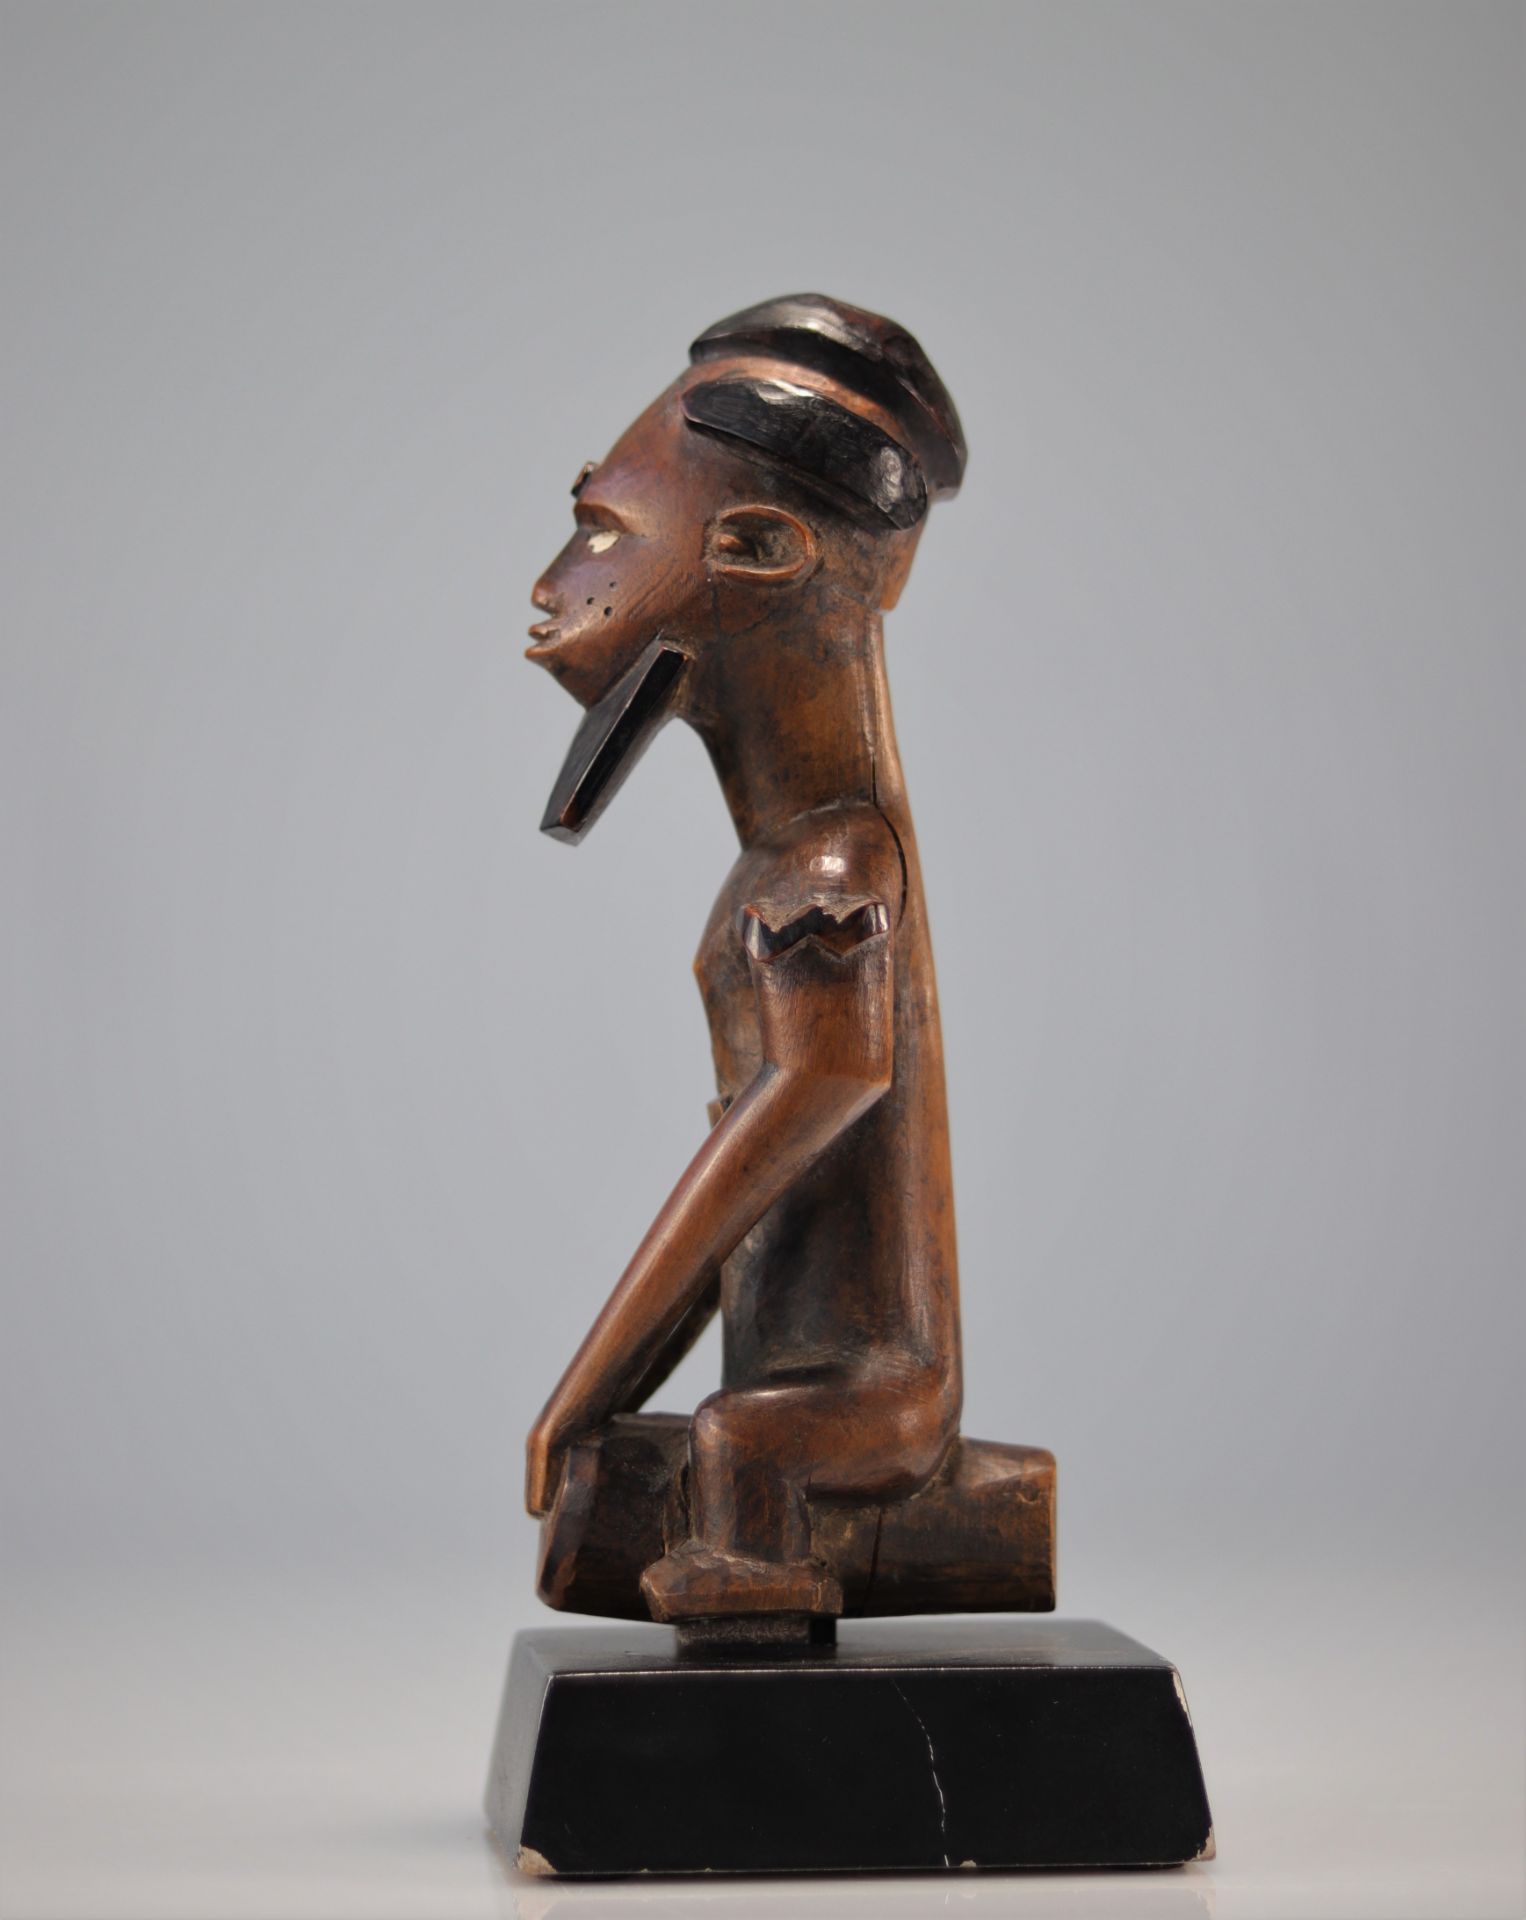 Bembe statue carved with a Finch & Co character through the worlds - Image 3 of 6